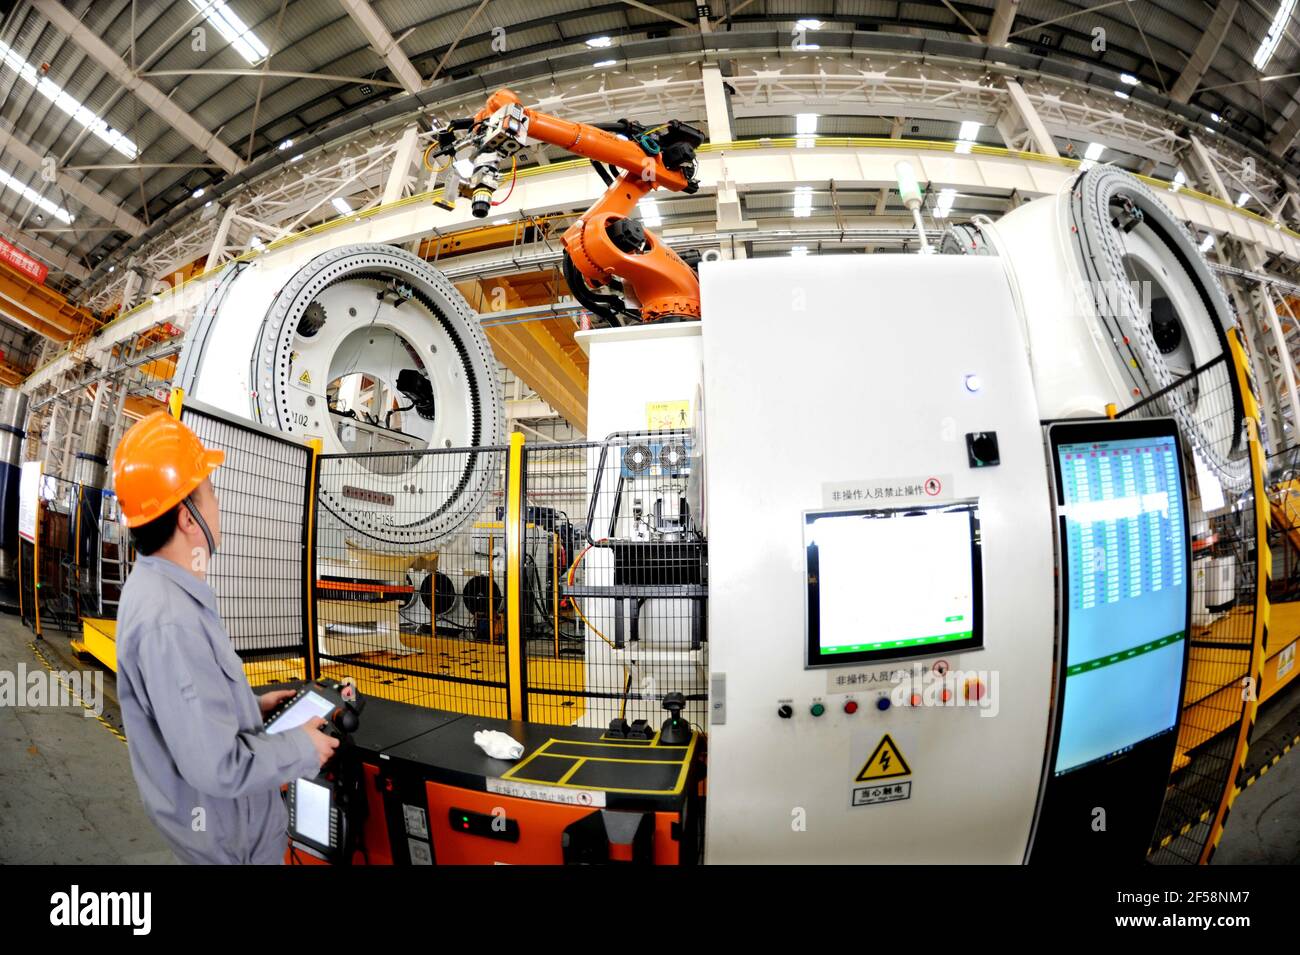 LIANYUNGANG, CHINA - MARCH 25, 2021 - A worker conducts a production operation at a production workshop of national  United Power Technology (Lianyungang) Co., Ltd in Lianyungang, Jiangsu province, China, March 25, 2021. national United Power Technology (Lianyungang) Co., Ltd. continues to carry out product upgrading and innovation, and invests in R&D, manufacturing, sales and commissioning projects of 8-15MW offshore wind turbine and 3.X-5.X onshore large wind turbine. Up to now, the output has increased by 92% compared with the same period last year. (Photo by Wang Chun / Costfoto/Sipa USA) Stock Photo